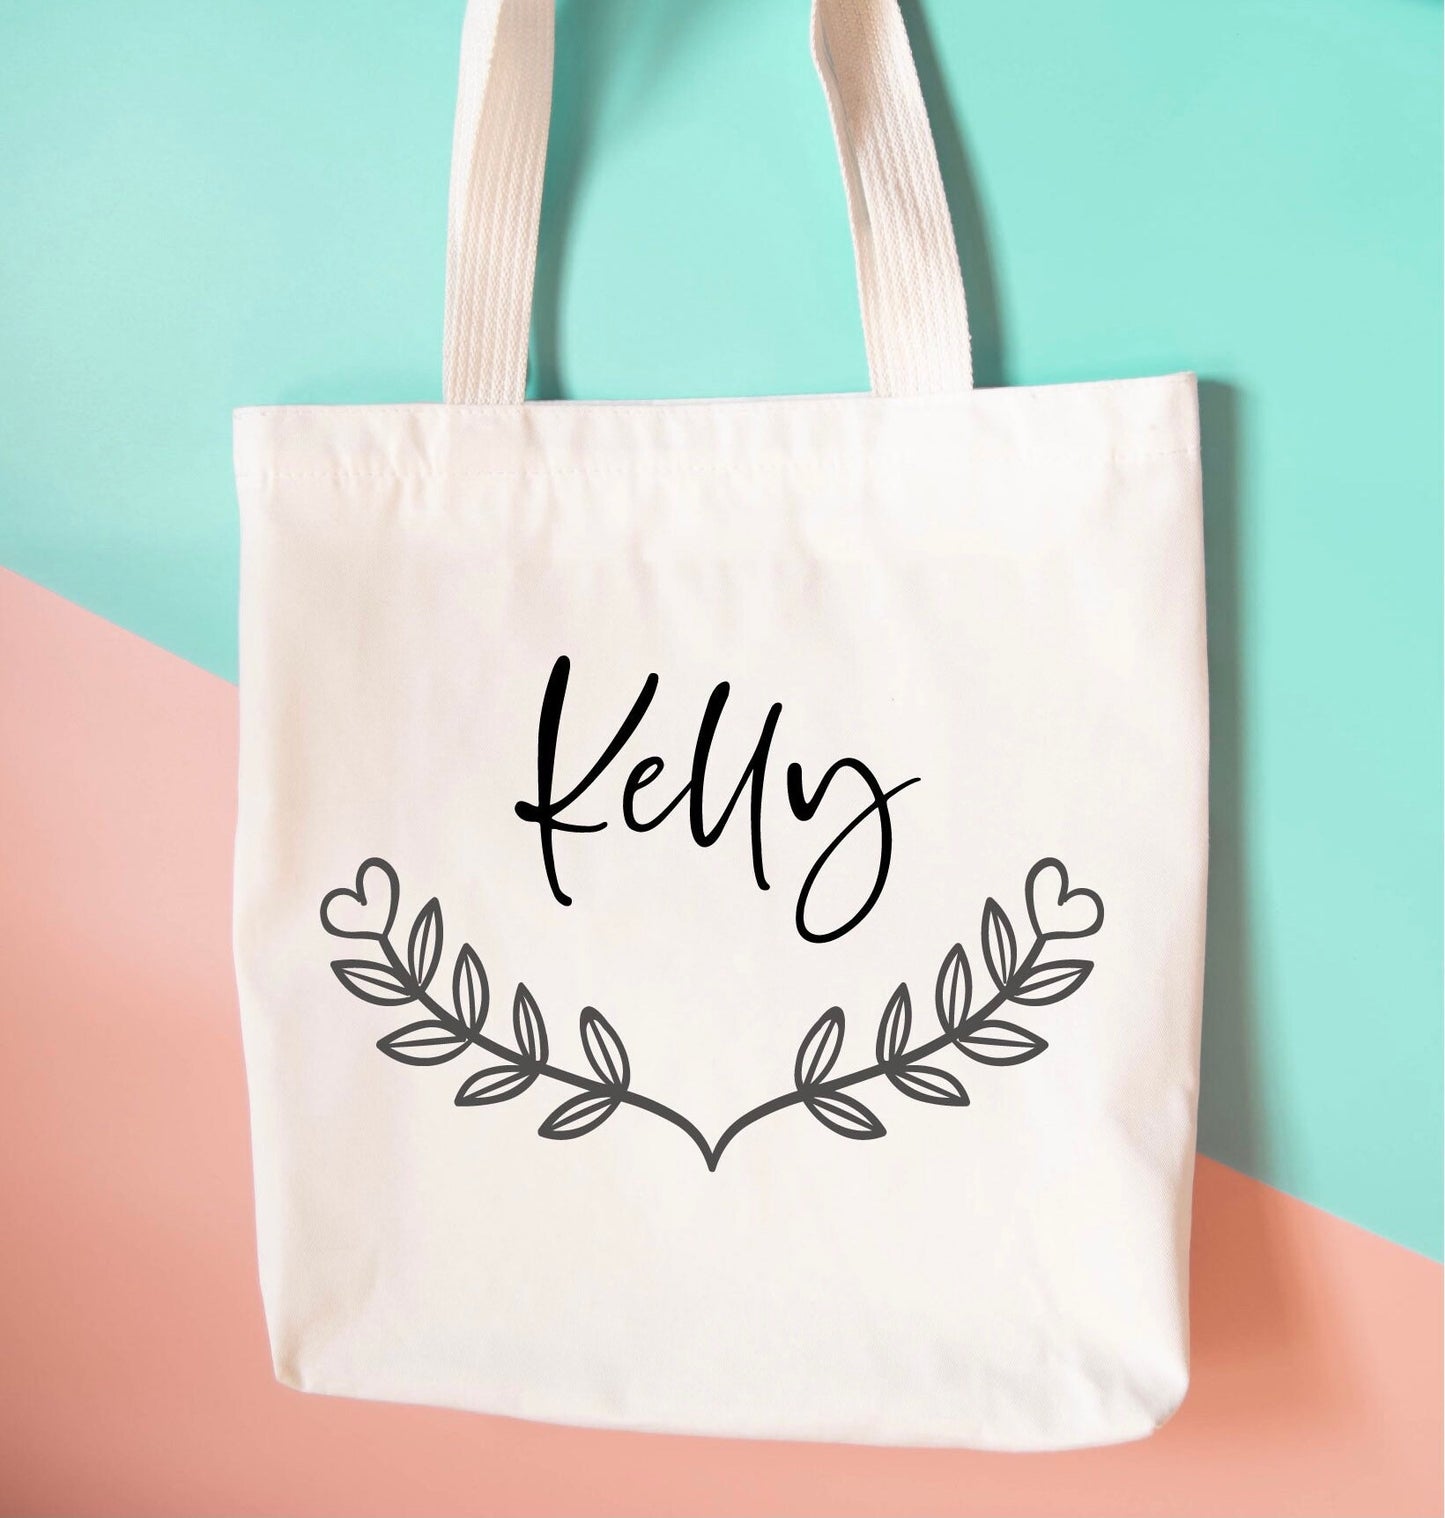 Personalised names tote shopper bag, Christmas or birthday gift for her, stocking fillers,school college book bag, kids school bag for xmas